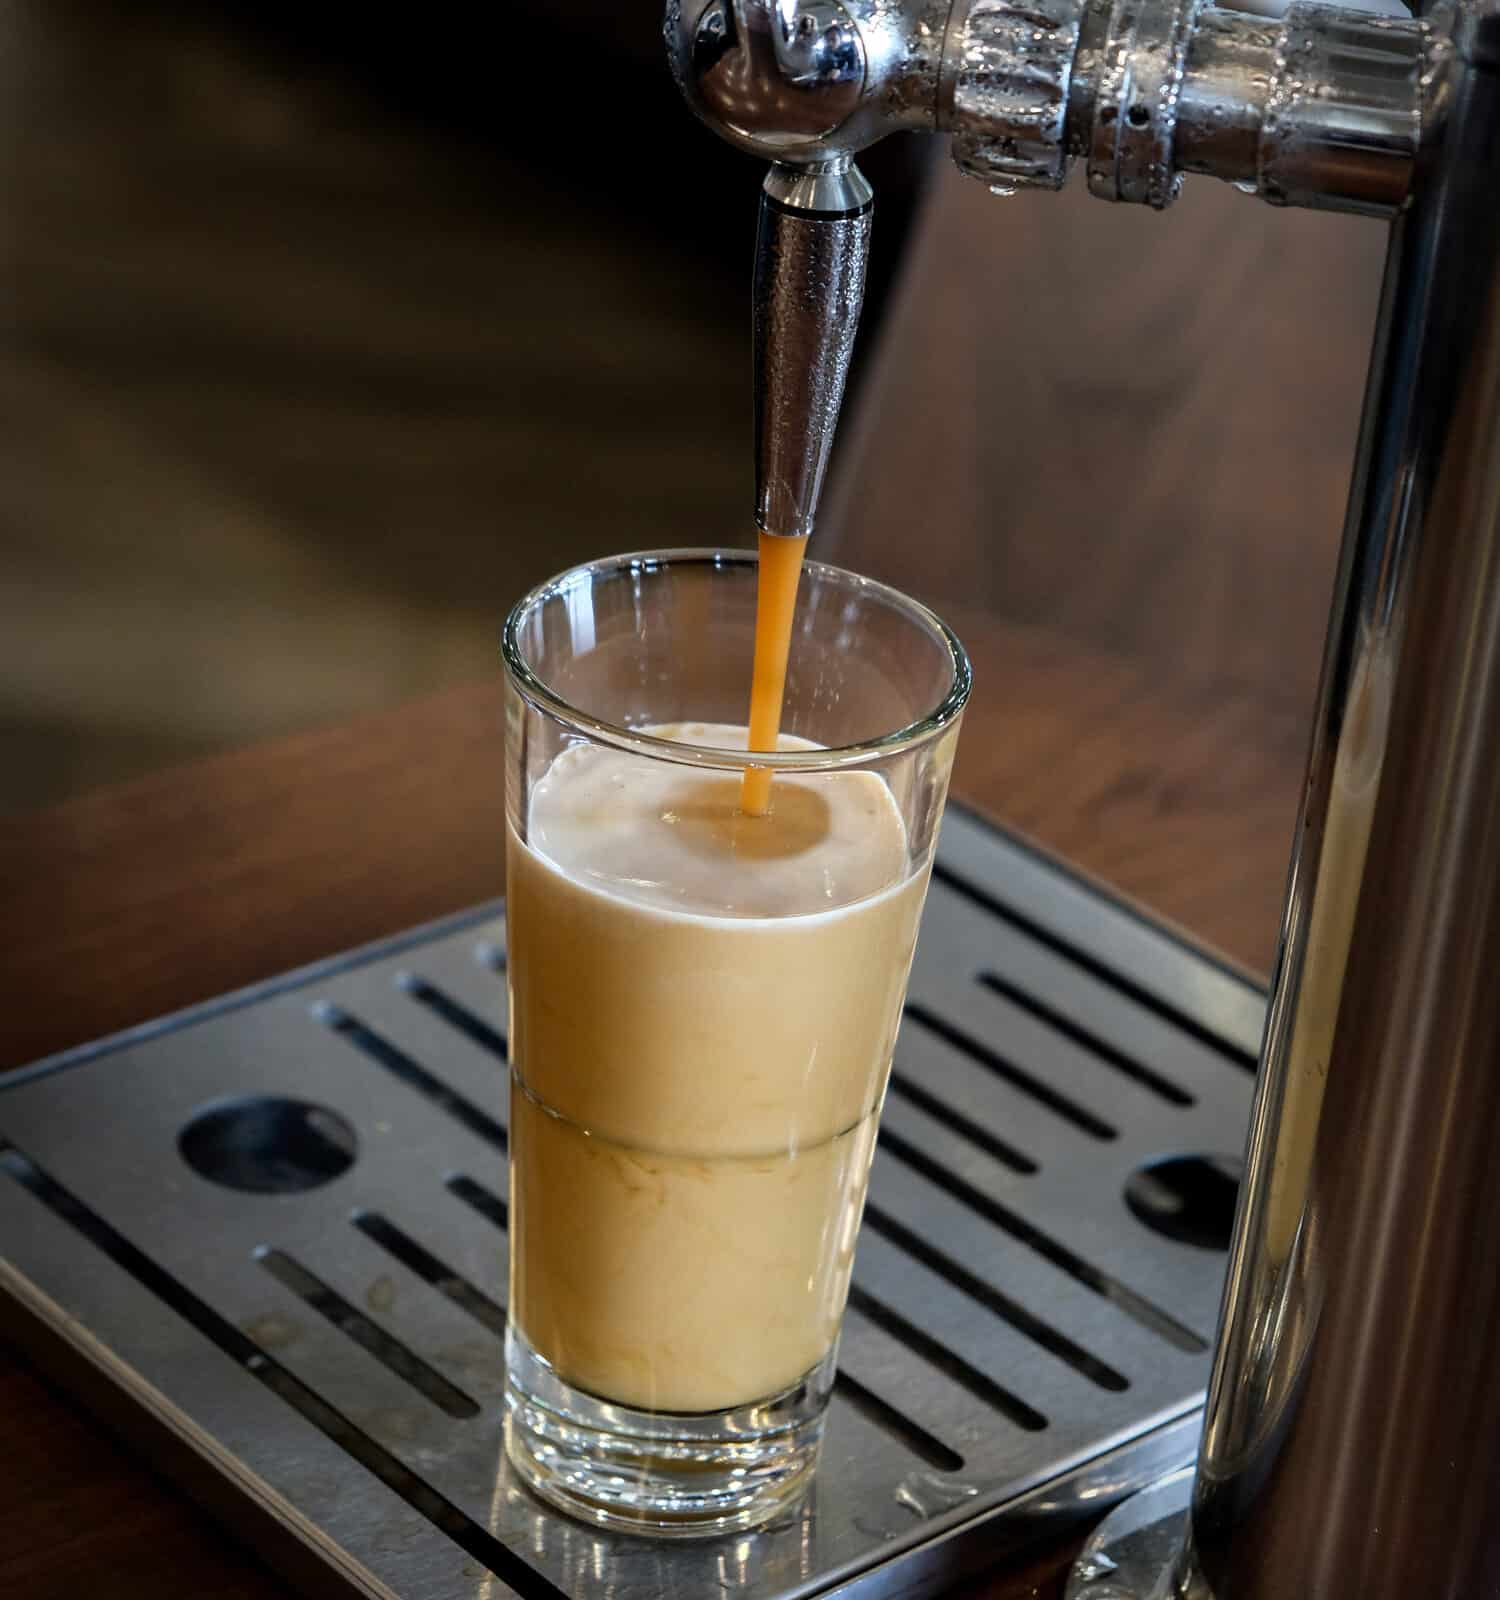 Frothy fresh nitro coffee from the tap,barista make from roasted bean coffee